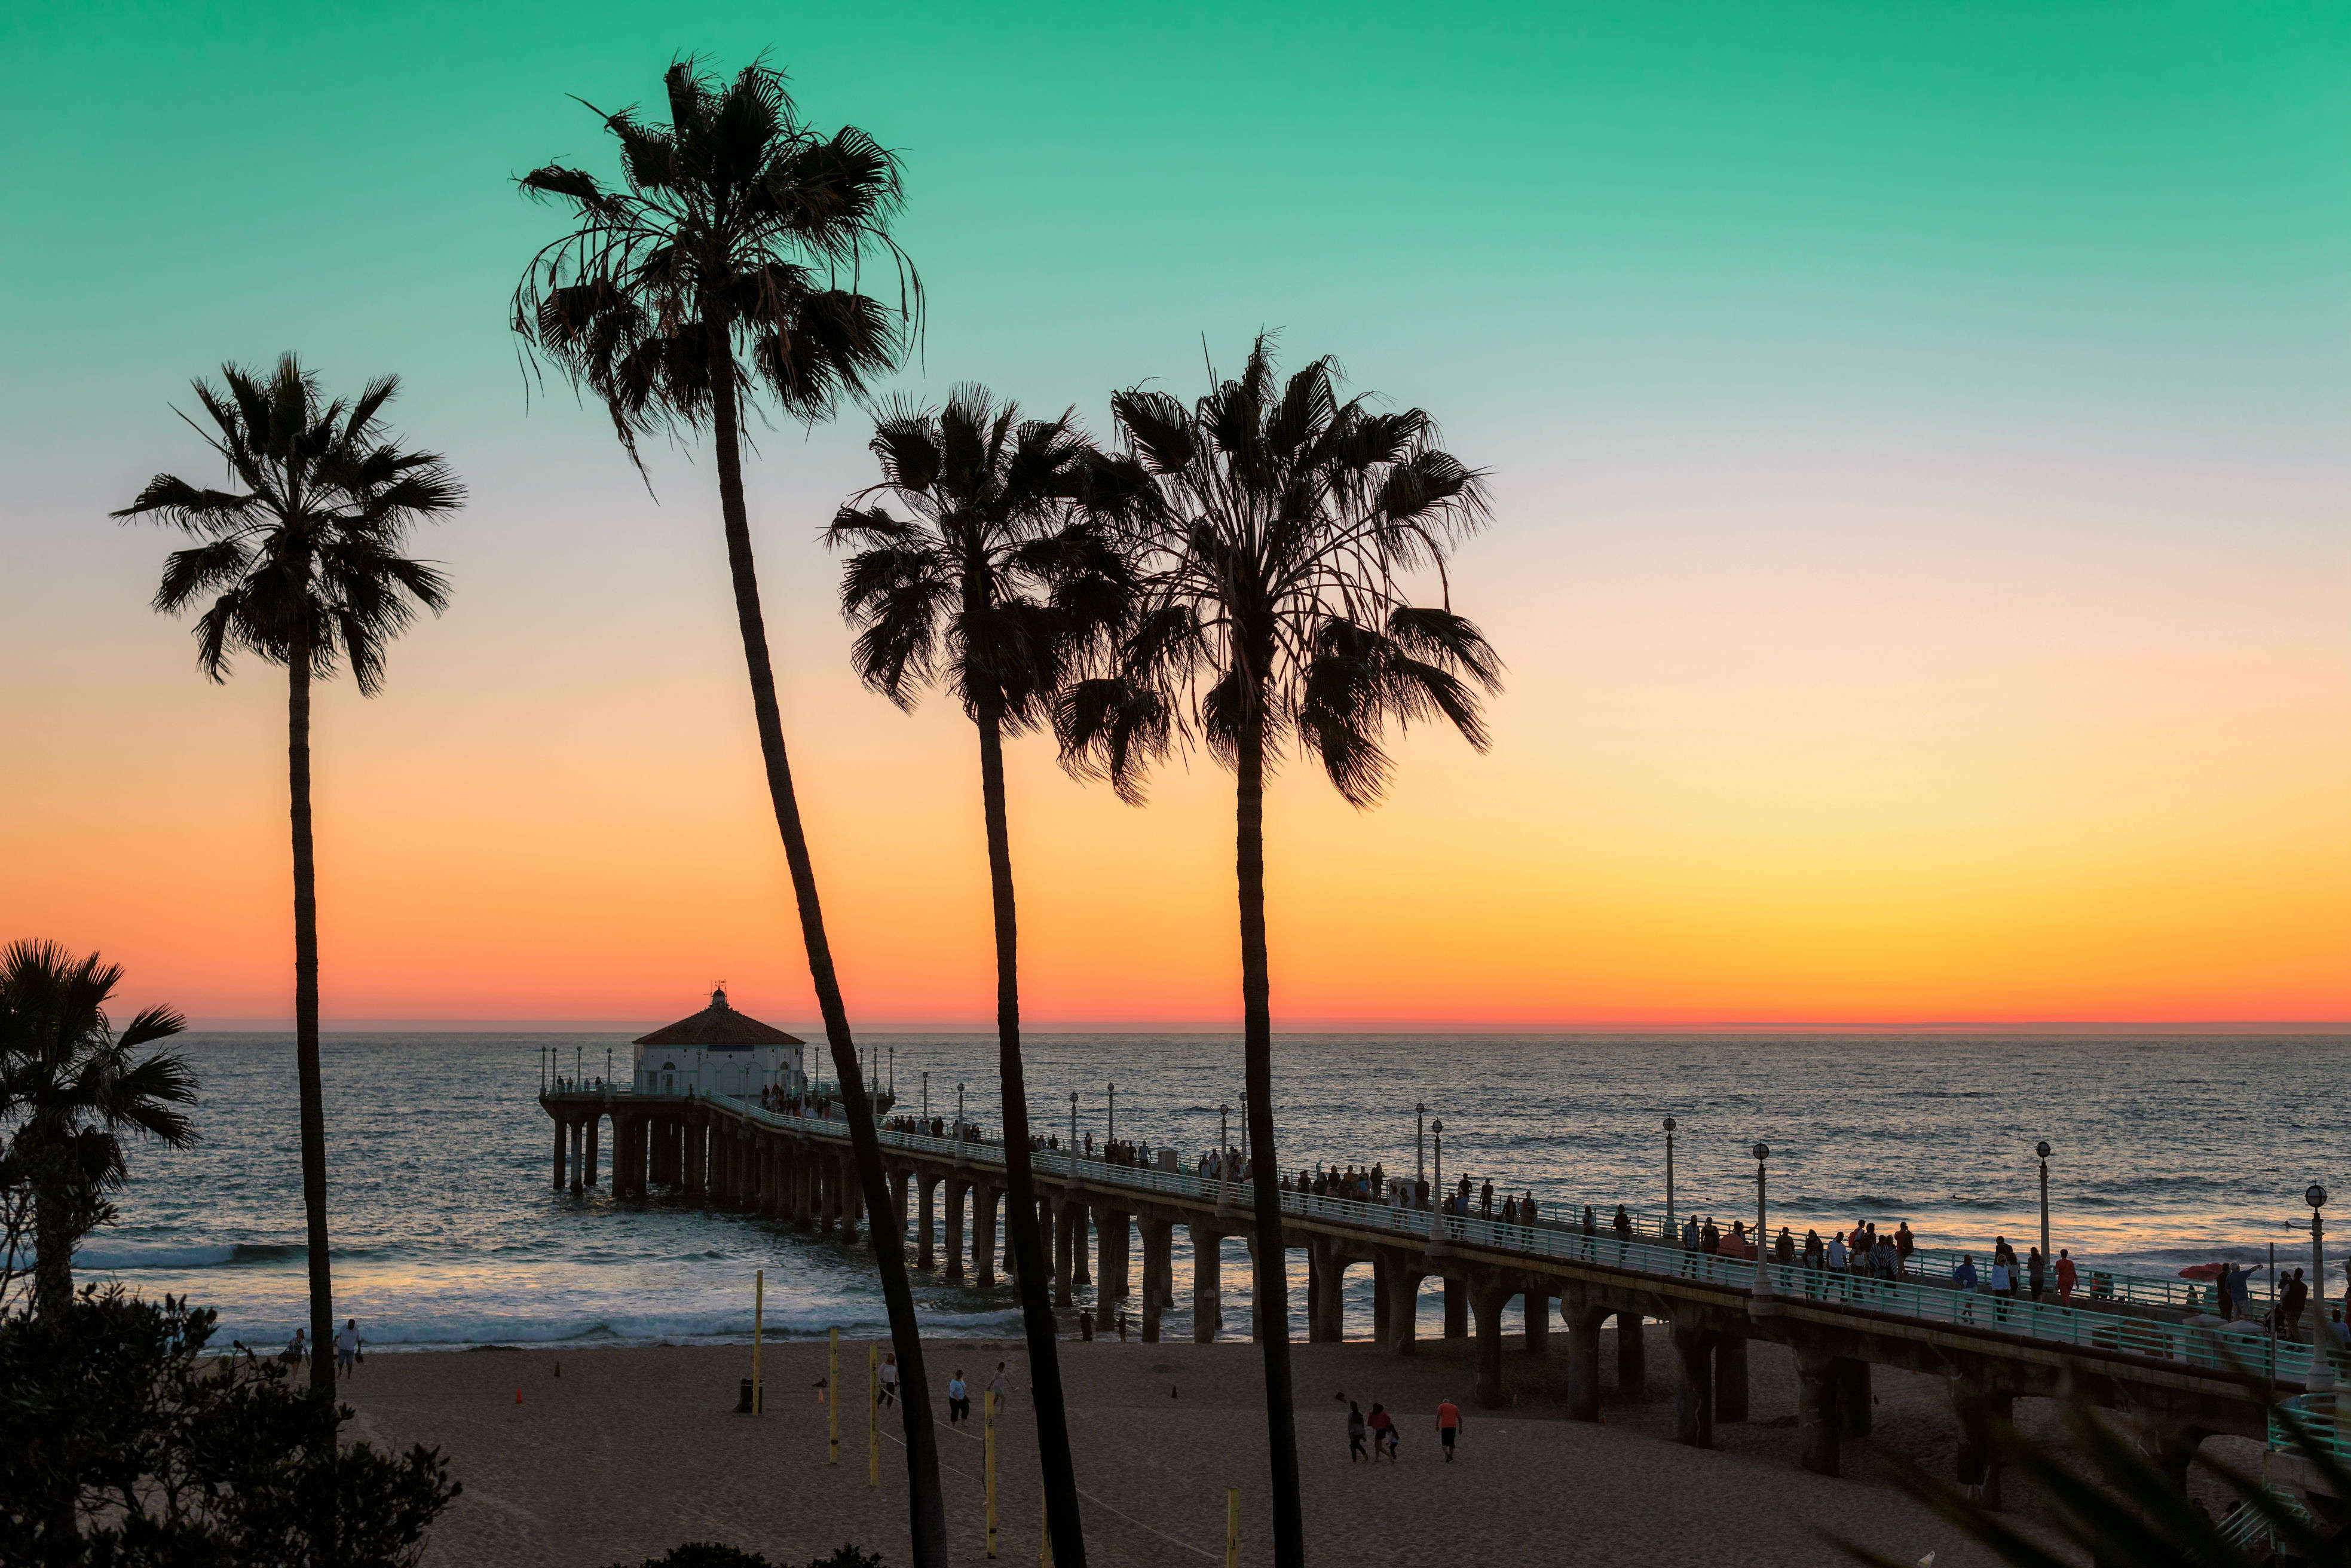 Day trips to Los Angeles’ favourite beach destinations